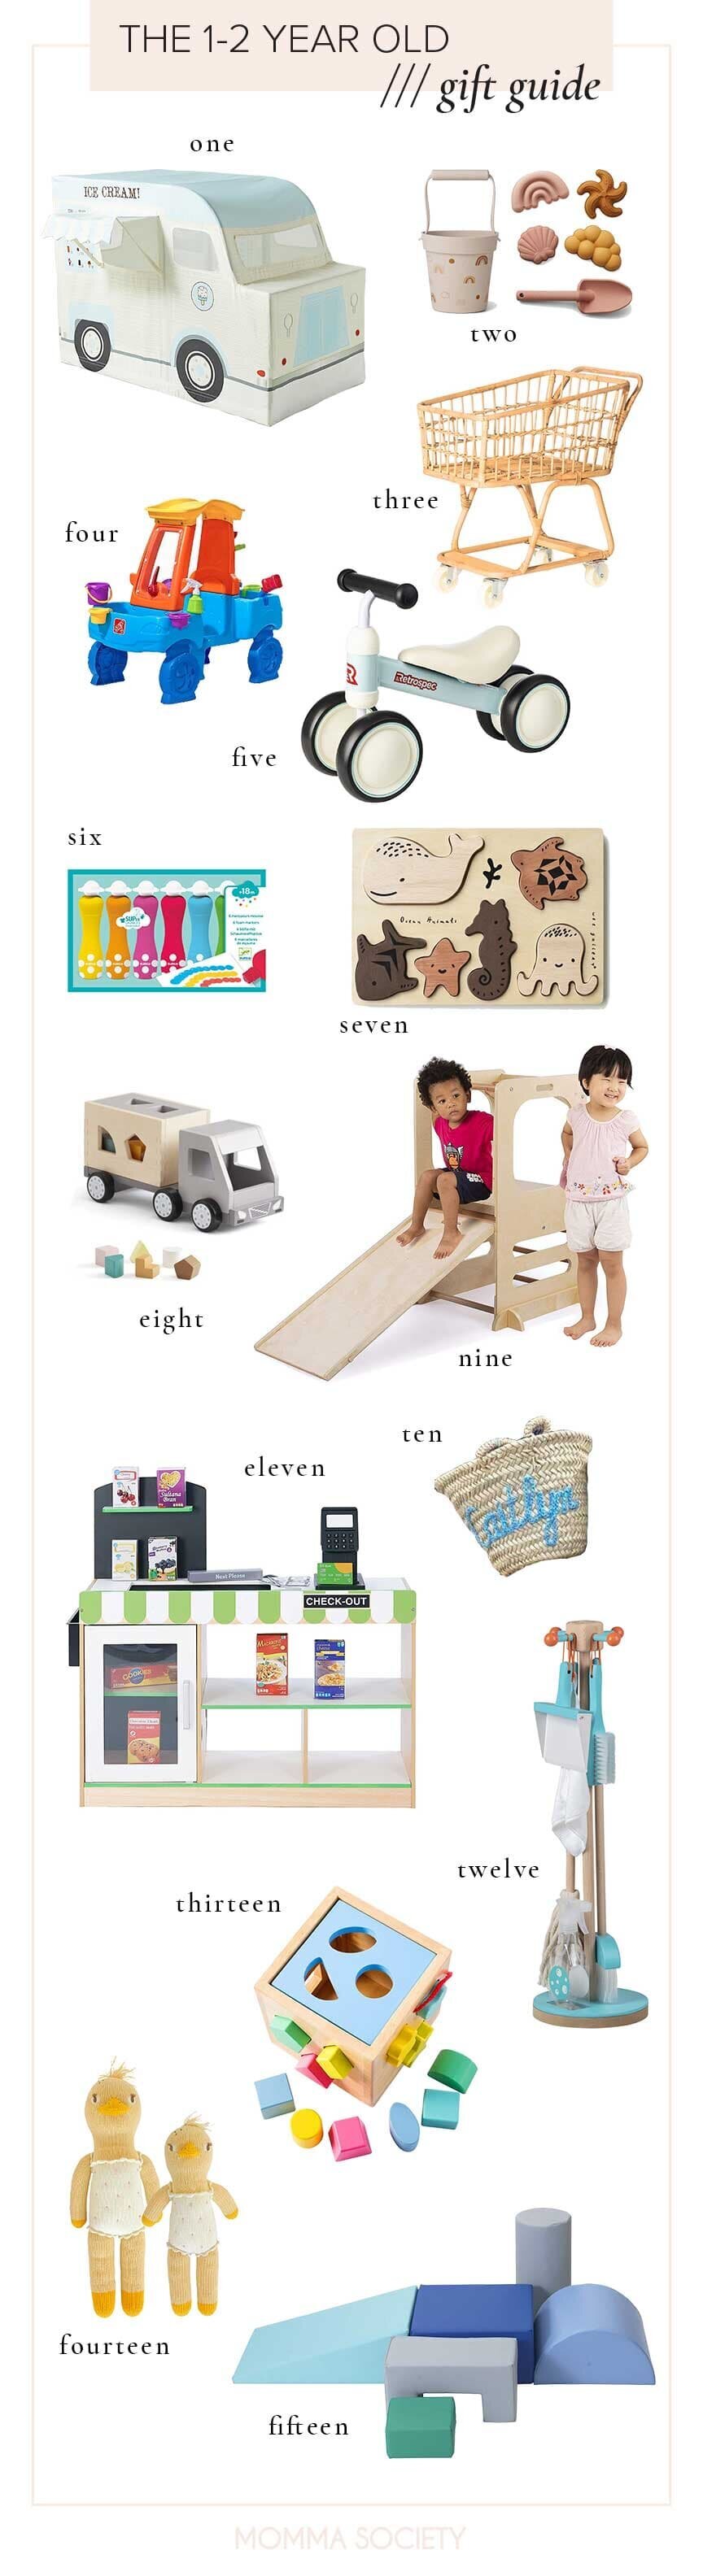 Gifts for Kids Under 5 - Christmas Gift Guide - Frosted Blog